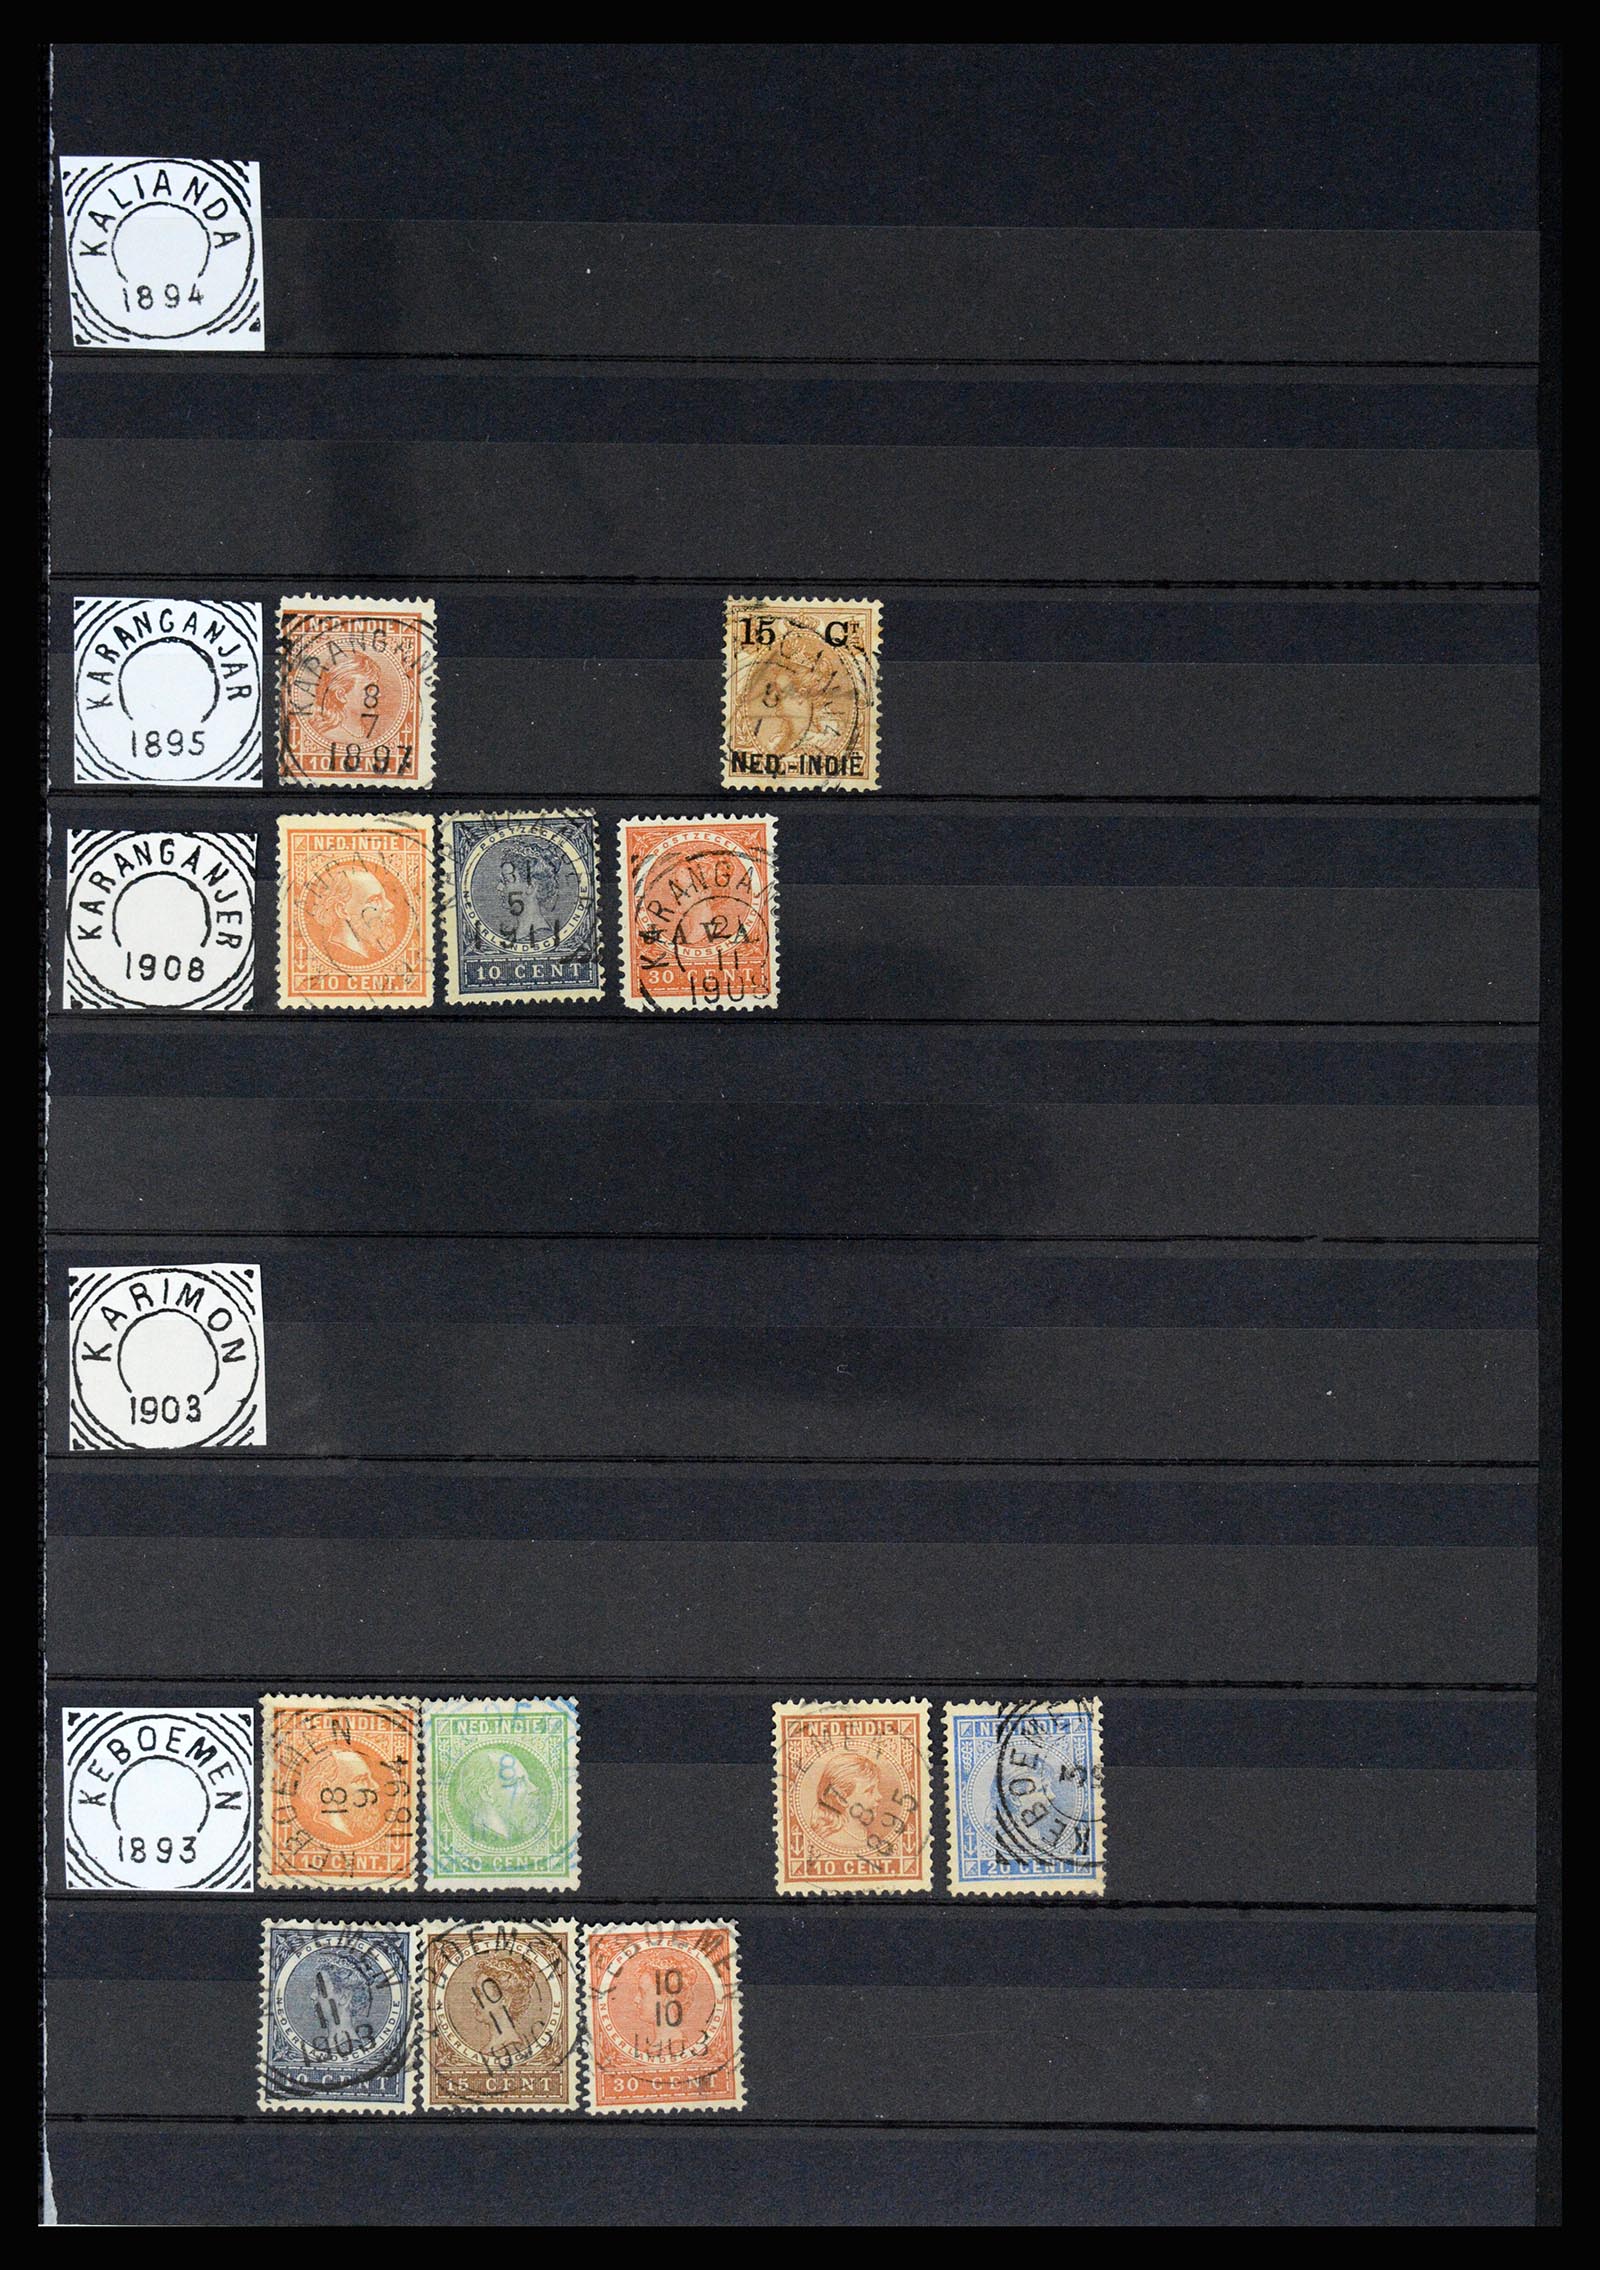 36839 018 - Stamp collection 36839 Dutch east Indies square cancels.